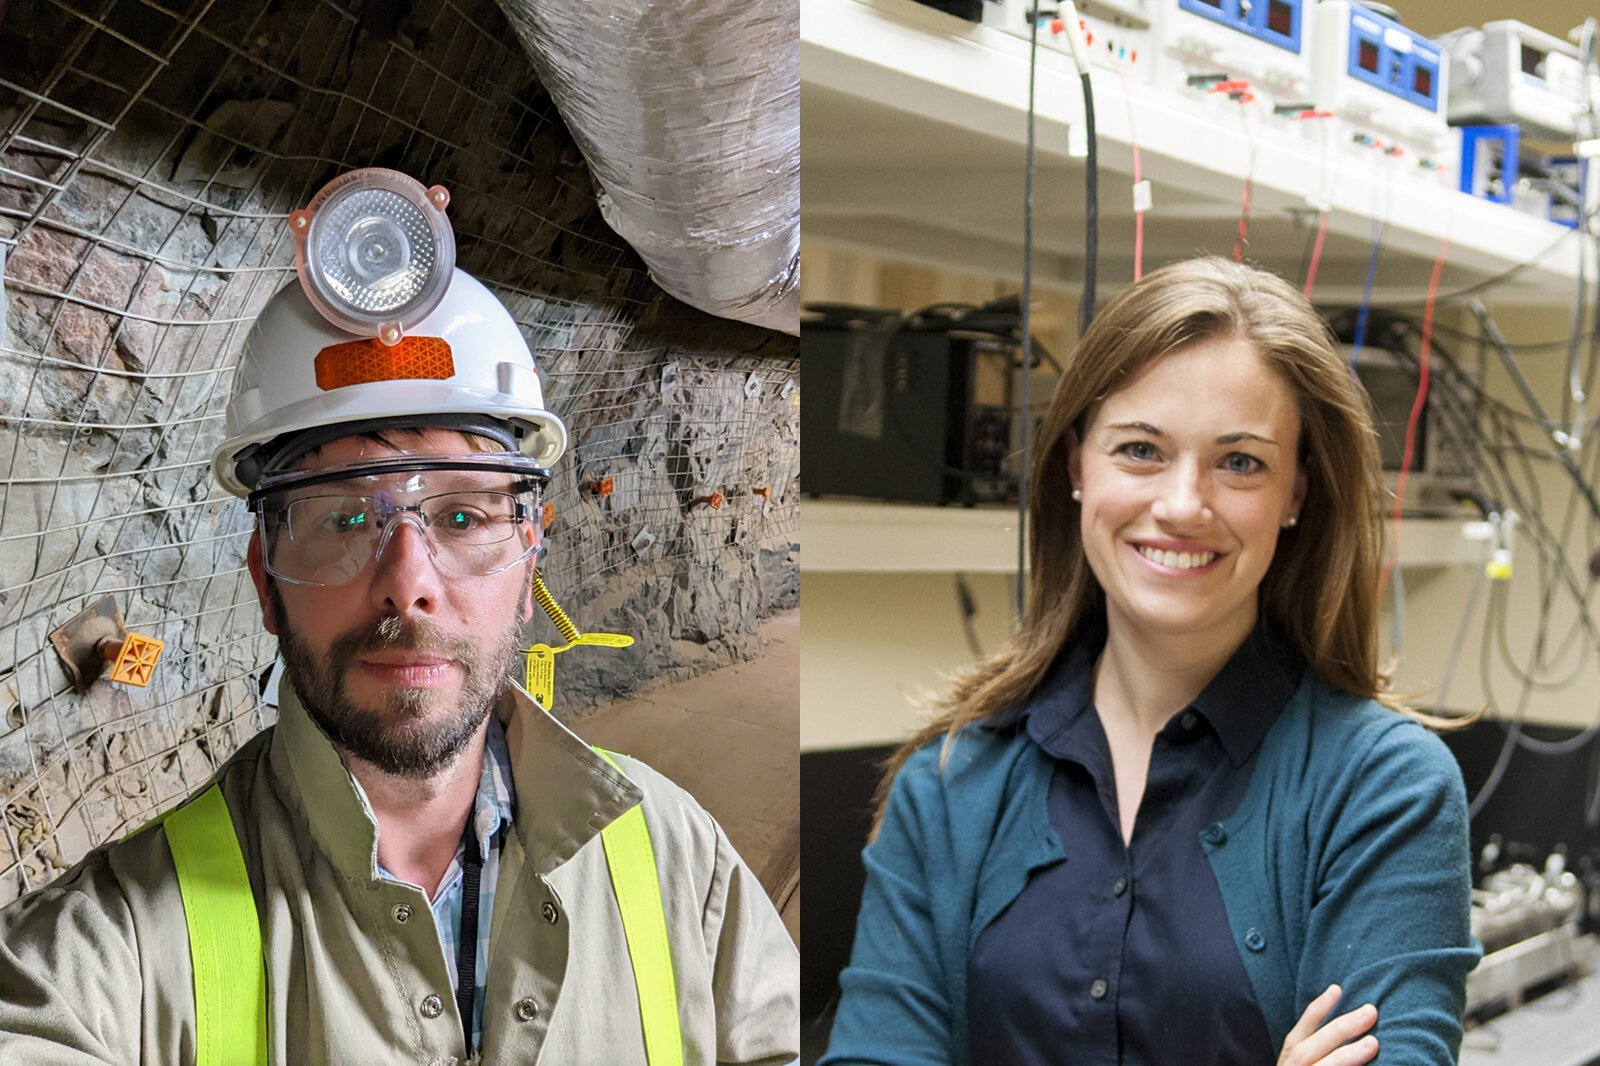 Bjoern Penning (left), U-M professor of physics, is the principal investigator of the RENEW grant. Brianna Mount (right), associate professor of physics at Black Hills State University, is working with Penning to implement the grant.